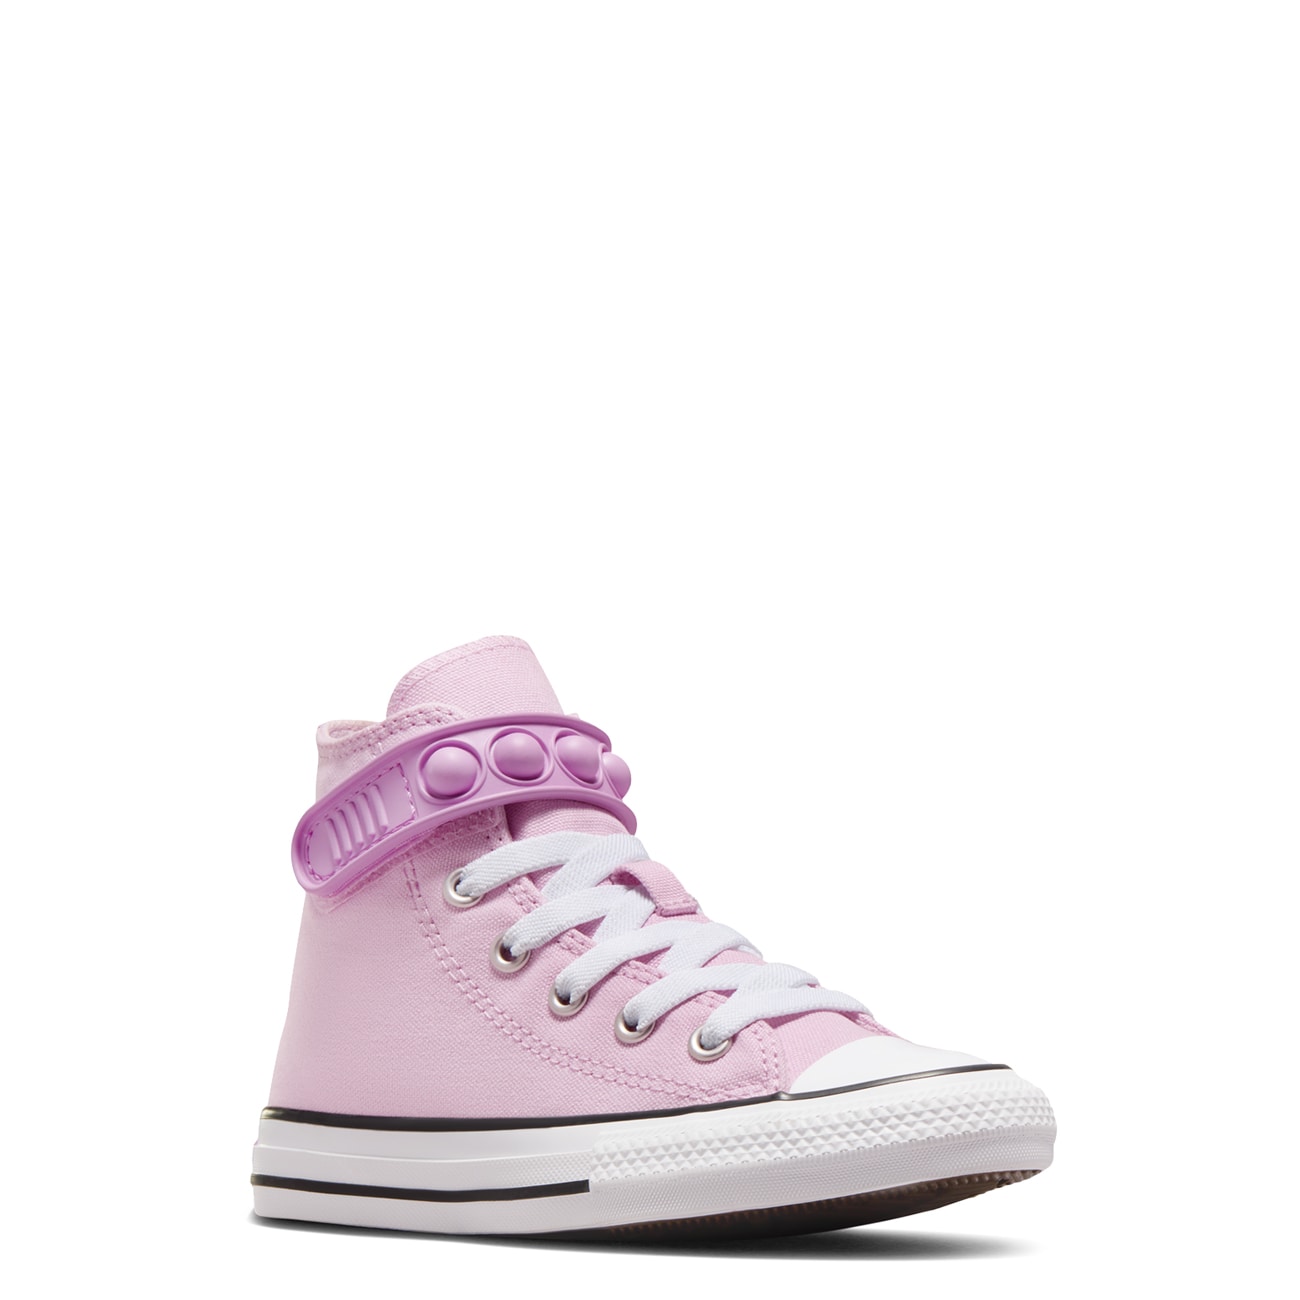 Youth Girls' Chuck Taylor All Star Bubble Strap High Top Sneaker